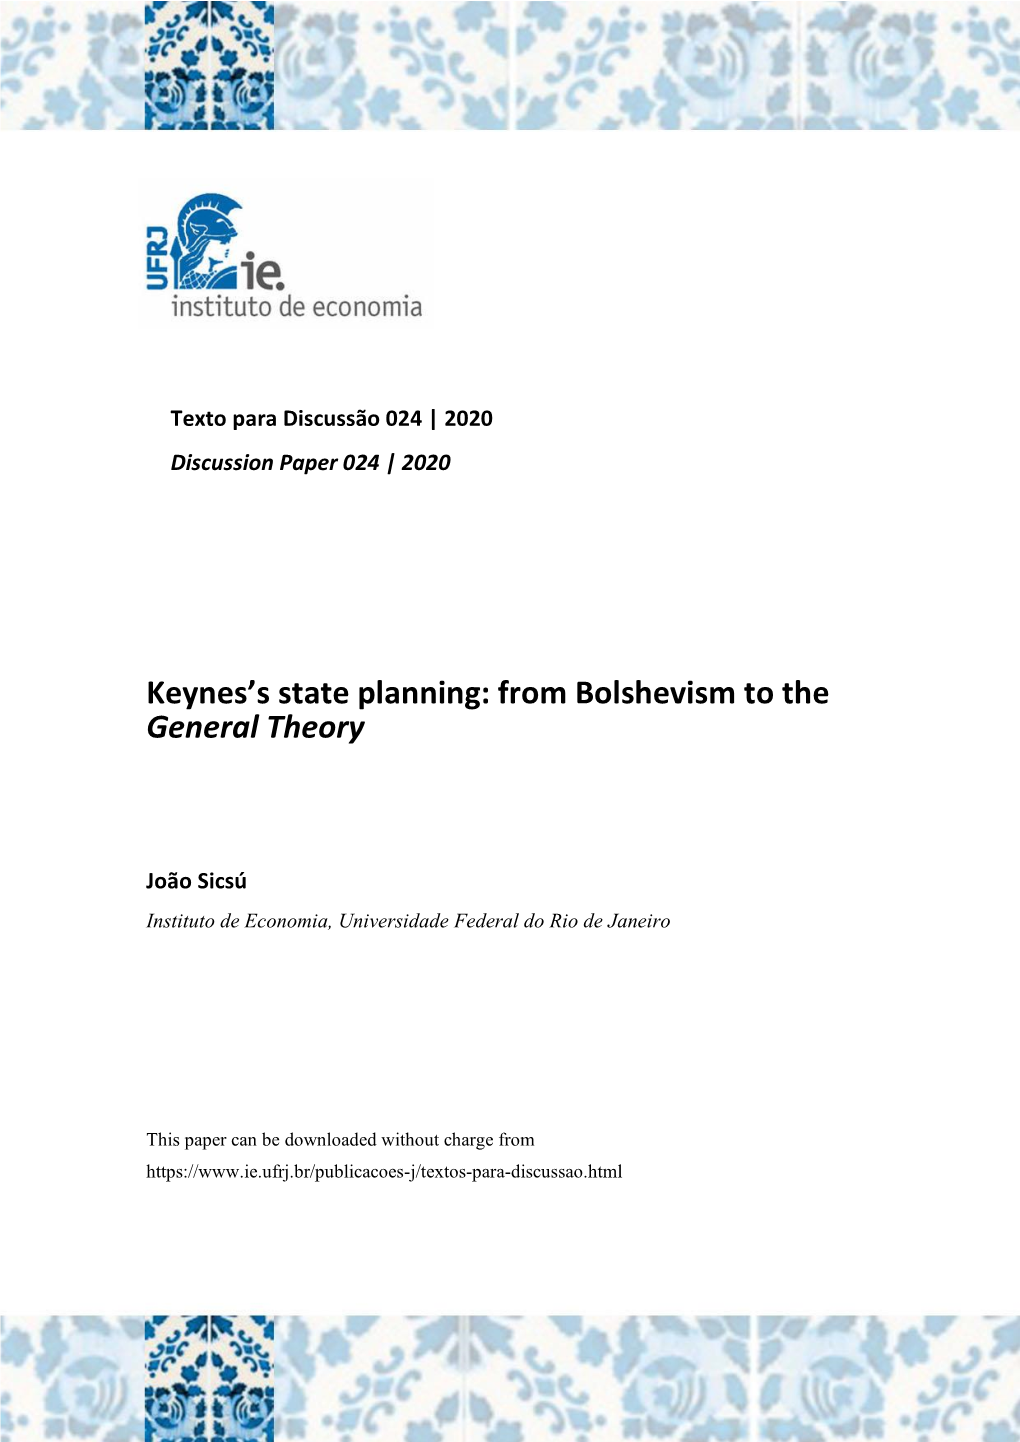 Keynes's State Planning: from Bolshevism to the General Theory